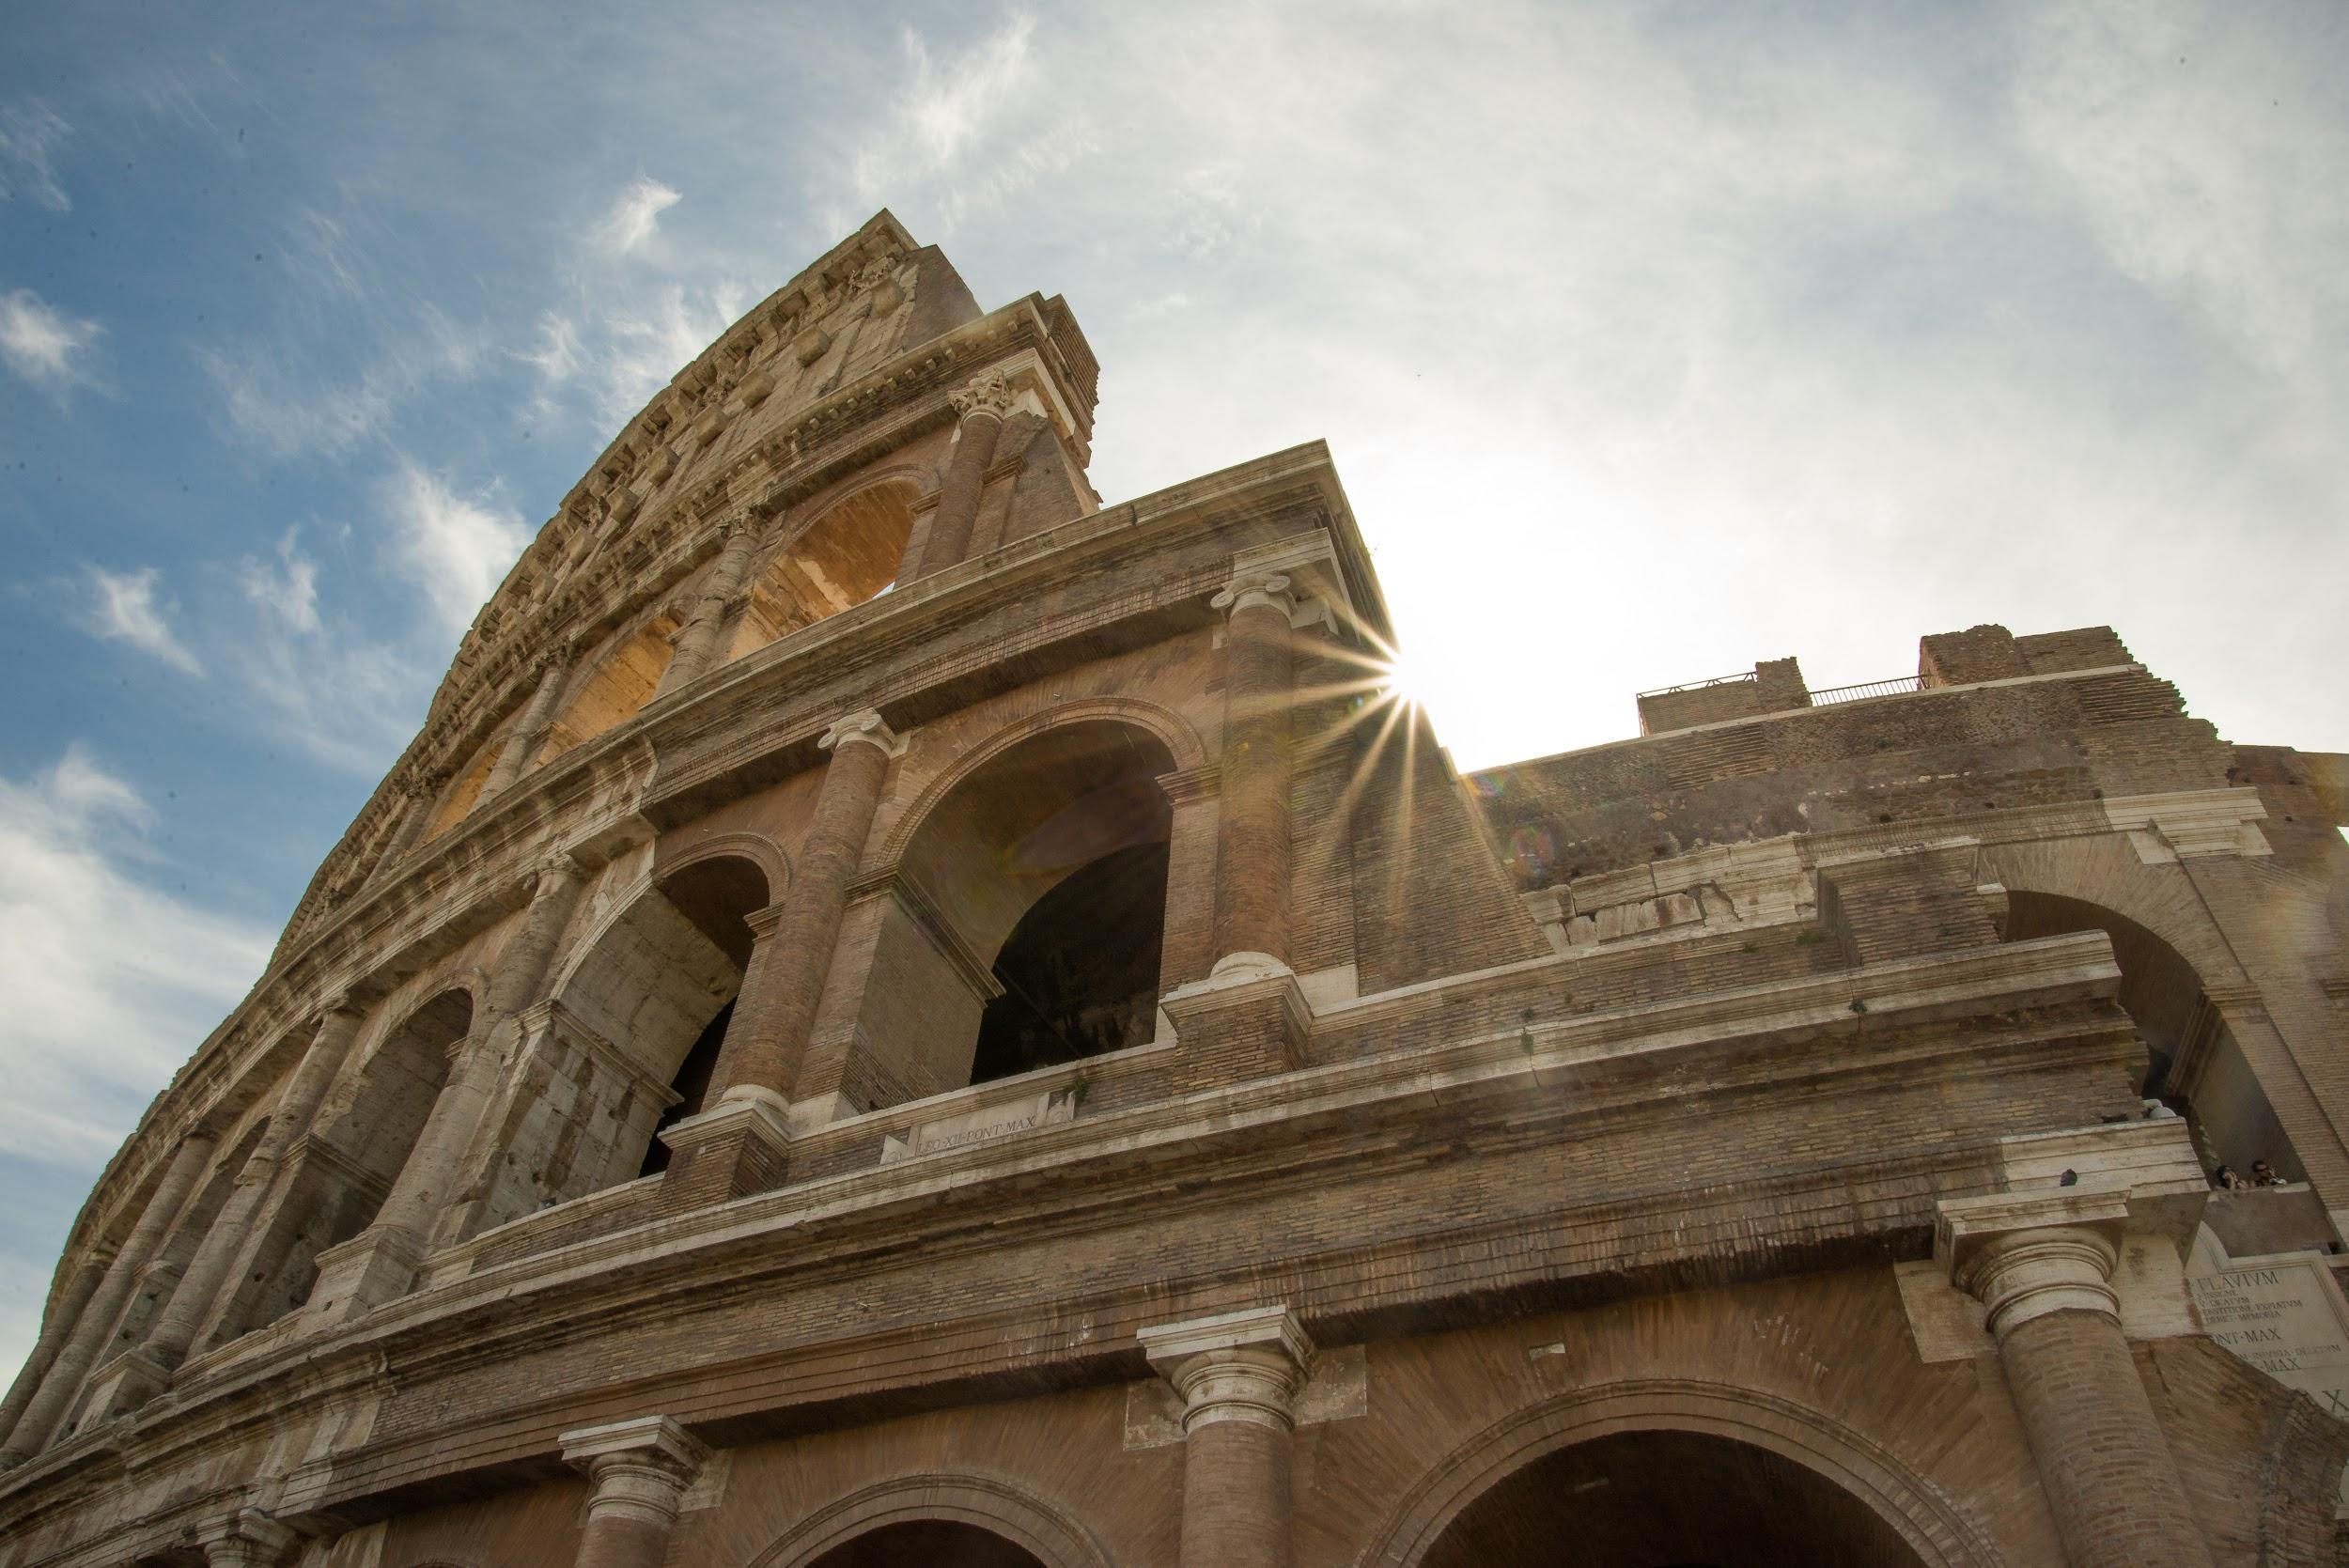 Thousands of years ago, gladiators entered these arches in hopes of gaining fame and fortune. Now, tourists enter for a glimpse into the past and a quick stop at the souvenir shop. (Rome, Italy) (ANH-TRAM BUI)